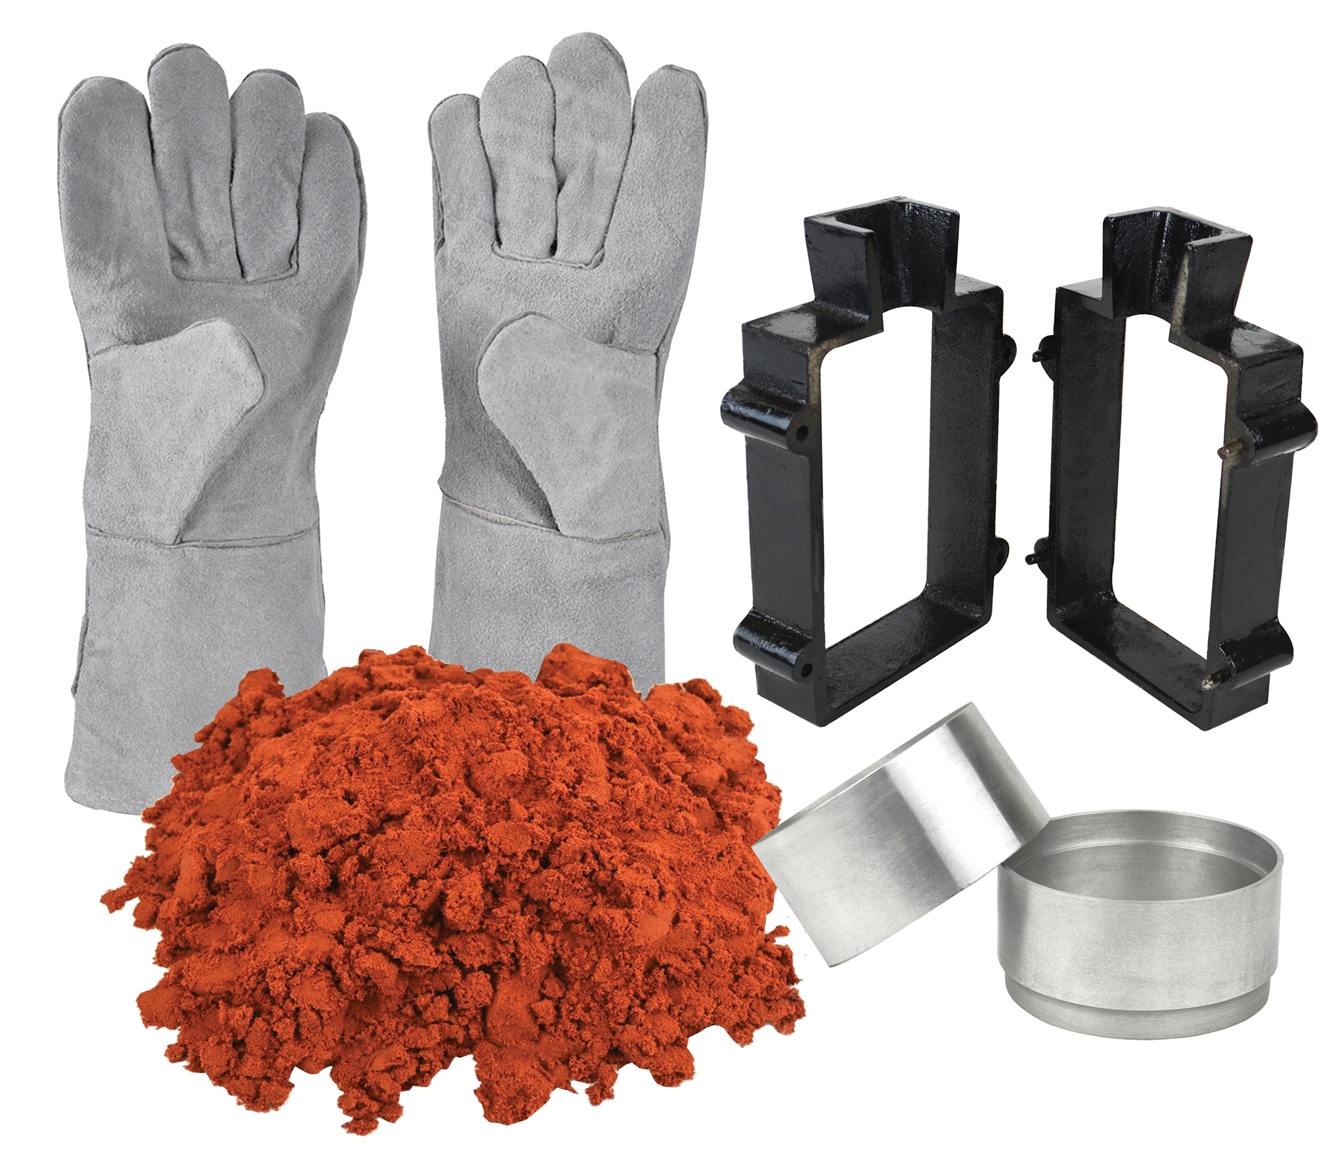 Sand Casting Set with 10 Lbs of Petrobond Sand Casting Clay, 100